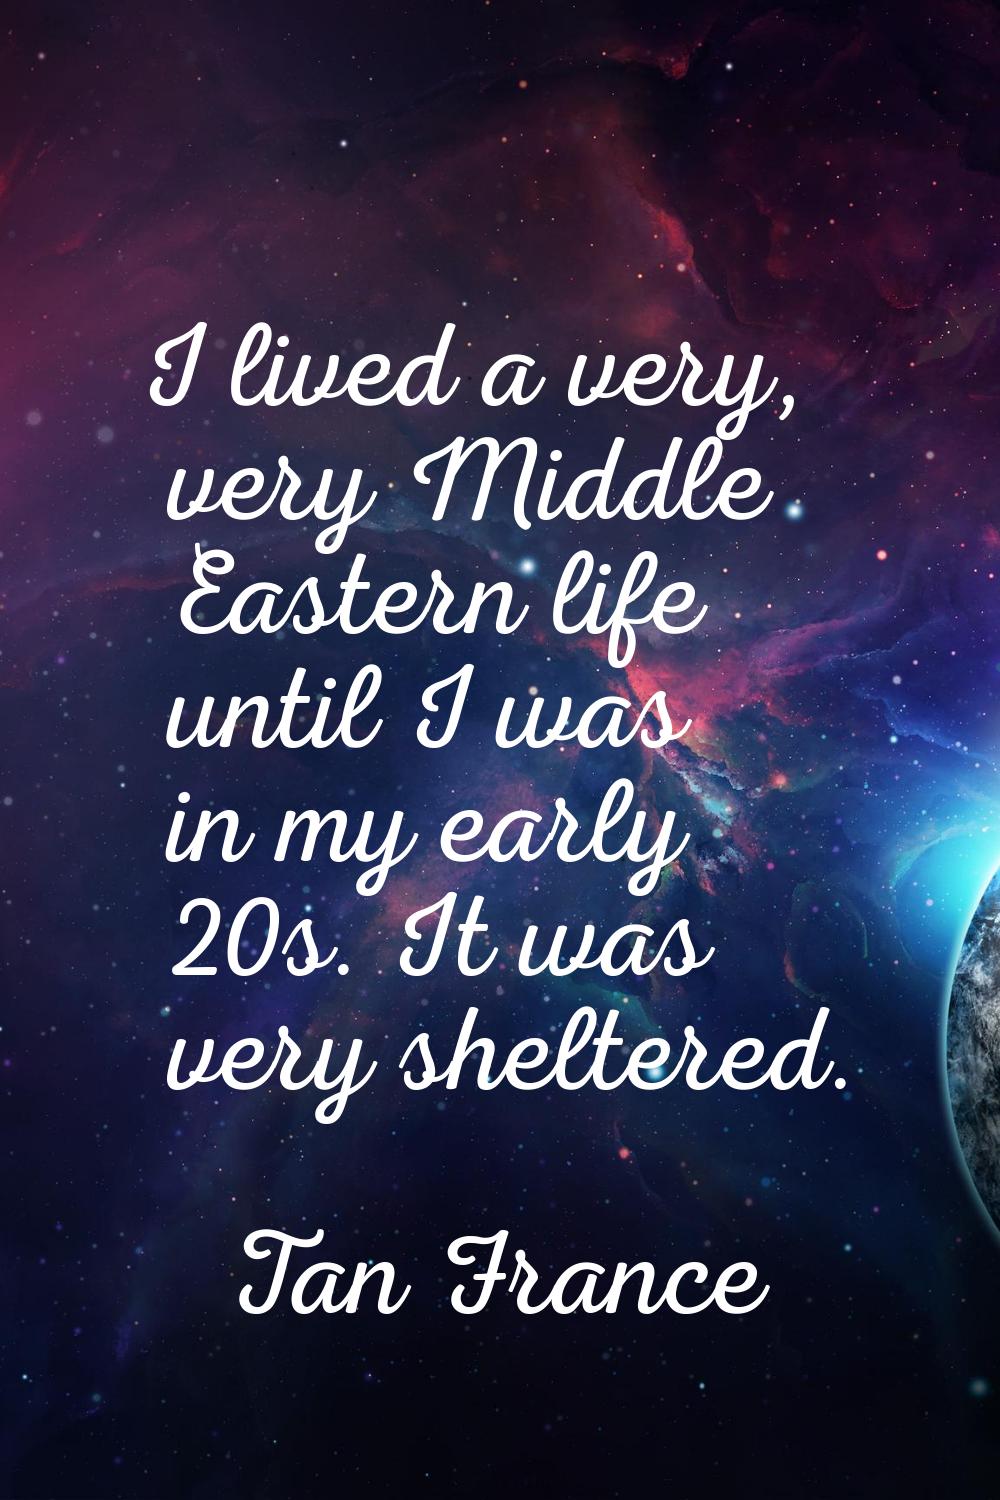 I lived a very, very Middle Eastern life until I was in my early 20s. It was very sheltered.